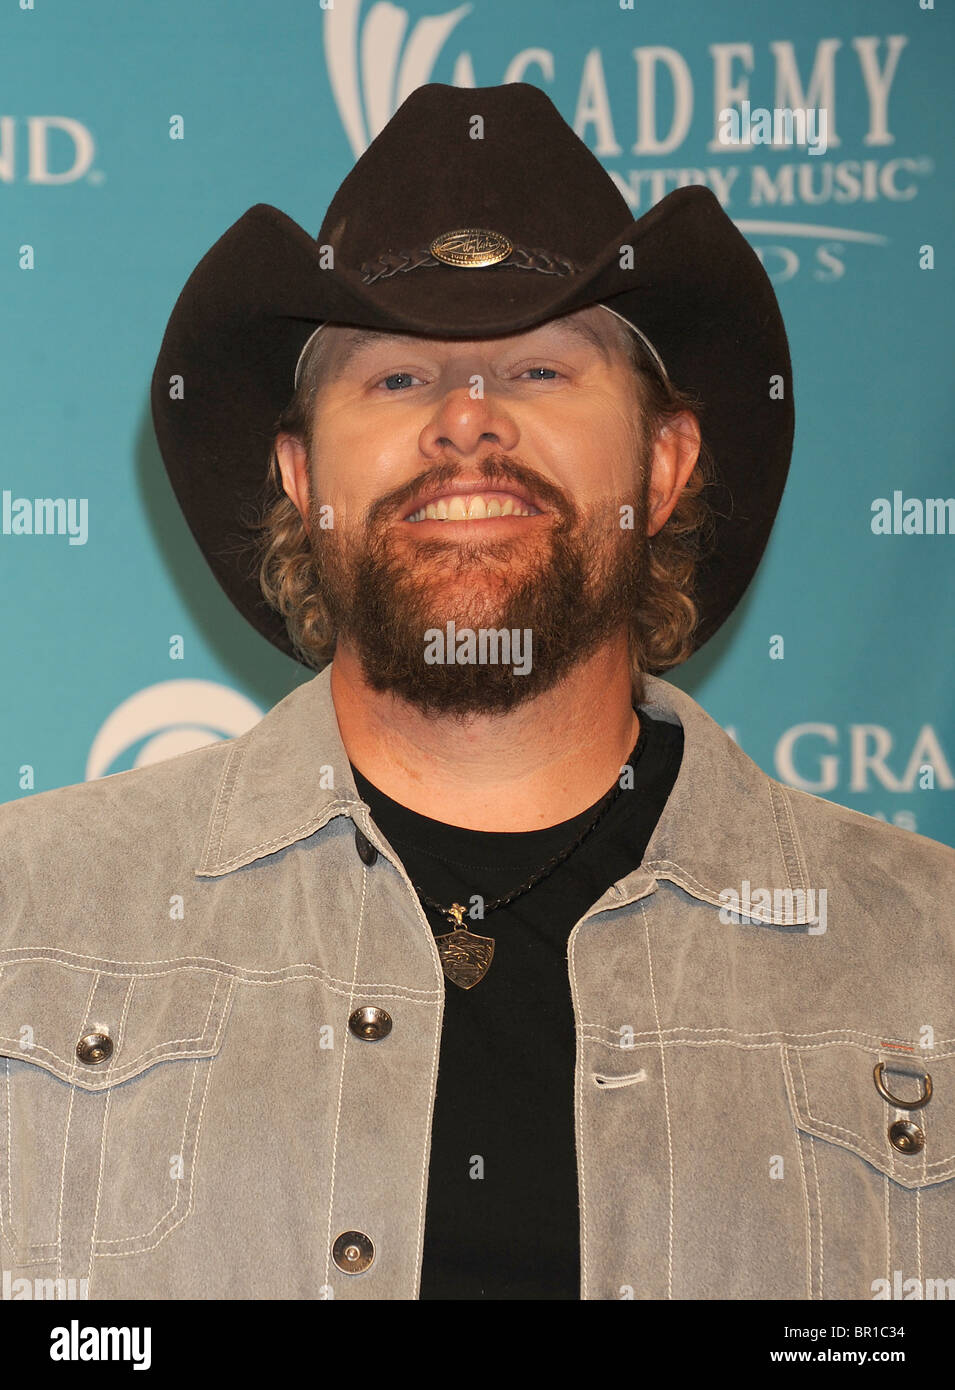 TOBY KEITH - US Country musician in Ap[ril 2010. See Description below. Photo Jeffrey Mayer Stock Photo